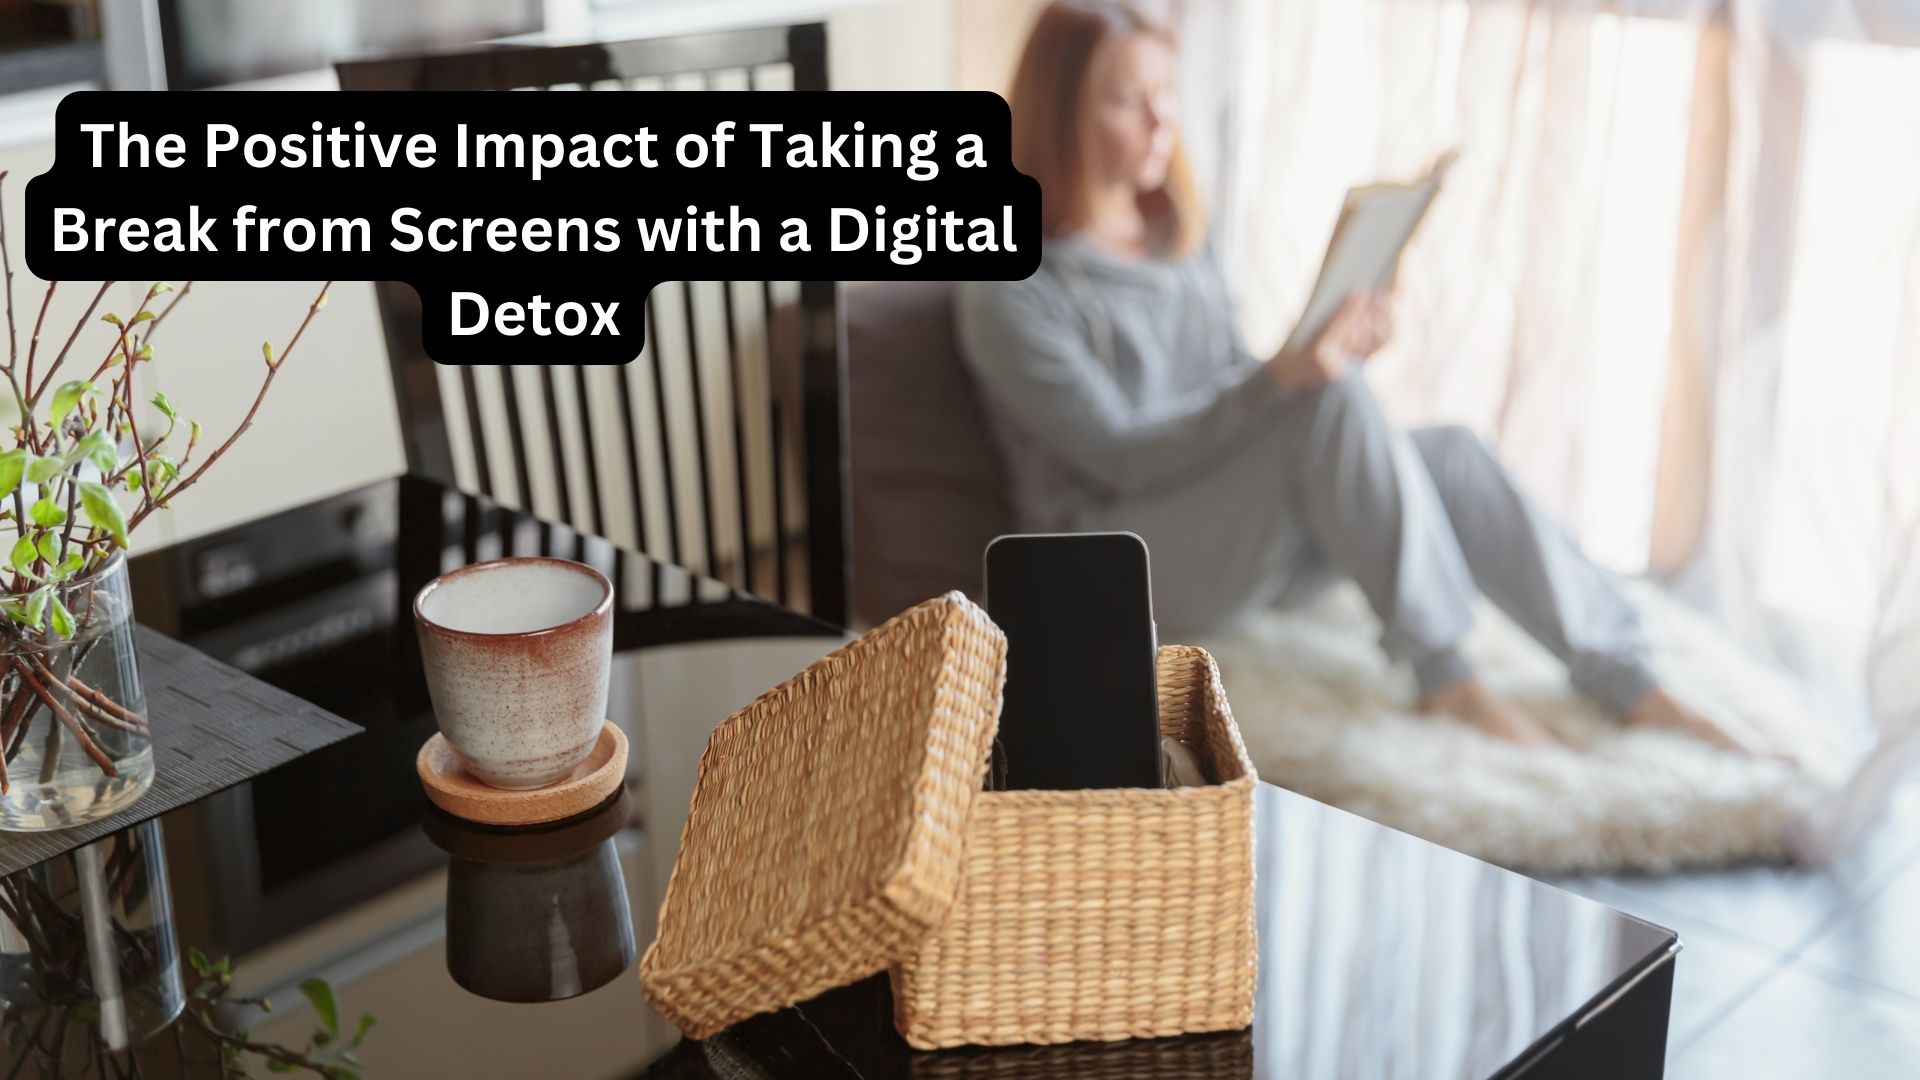 The Positive Impact of Taking a Break from Screens with a Digital Detox